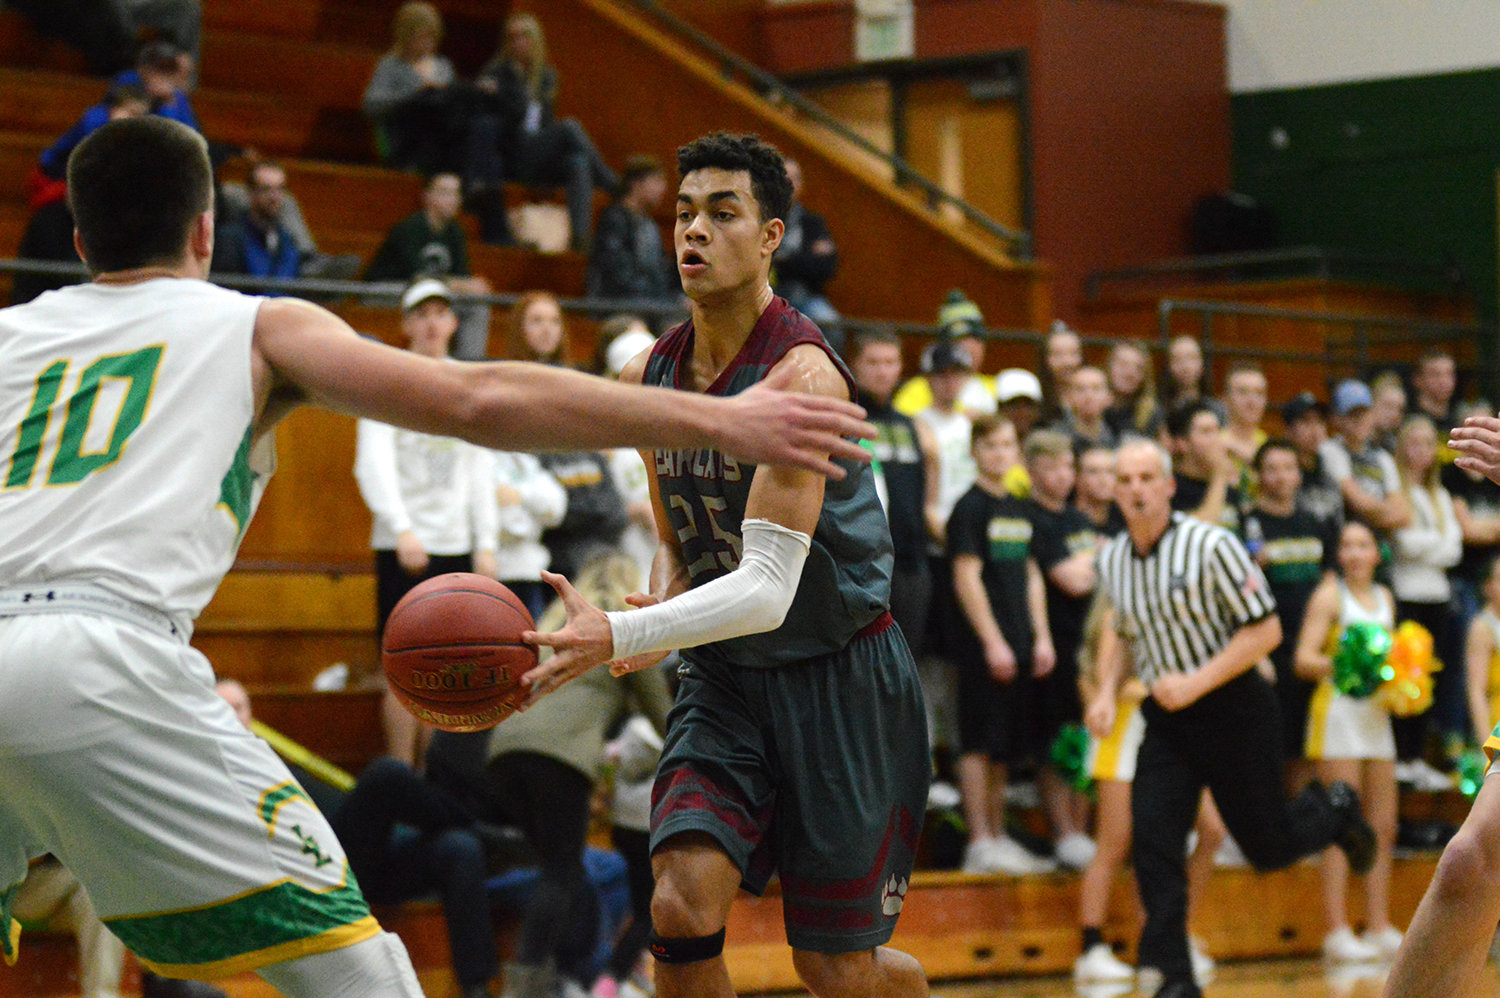 W.F. West's Jordan Thomas passes the ball against Lynden on Saturday night at Mount Vernon High School in a 2A regional boys basketball game.